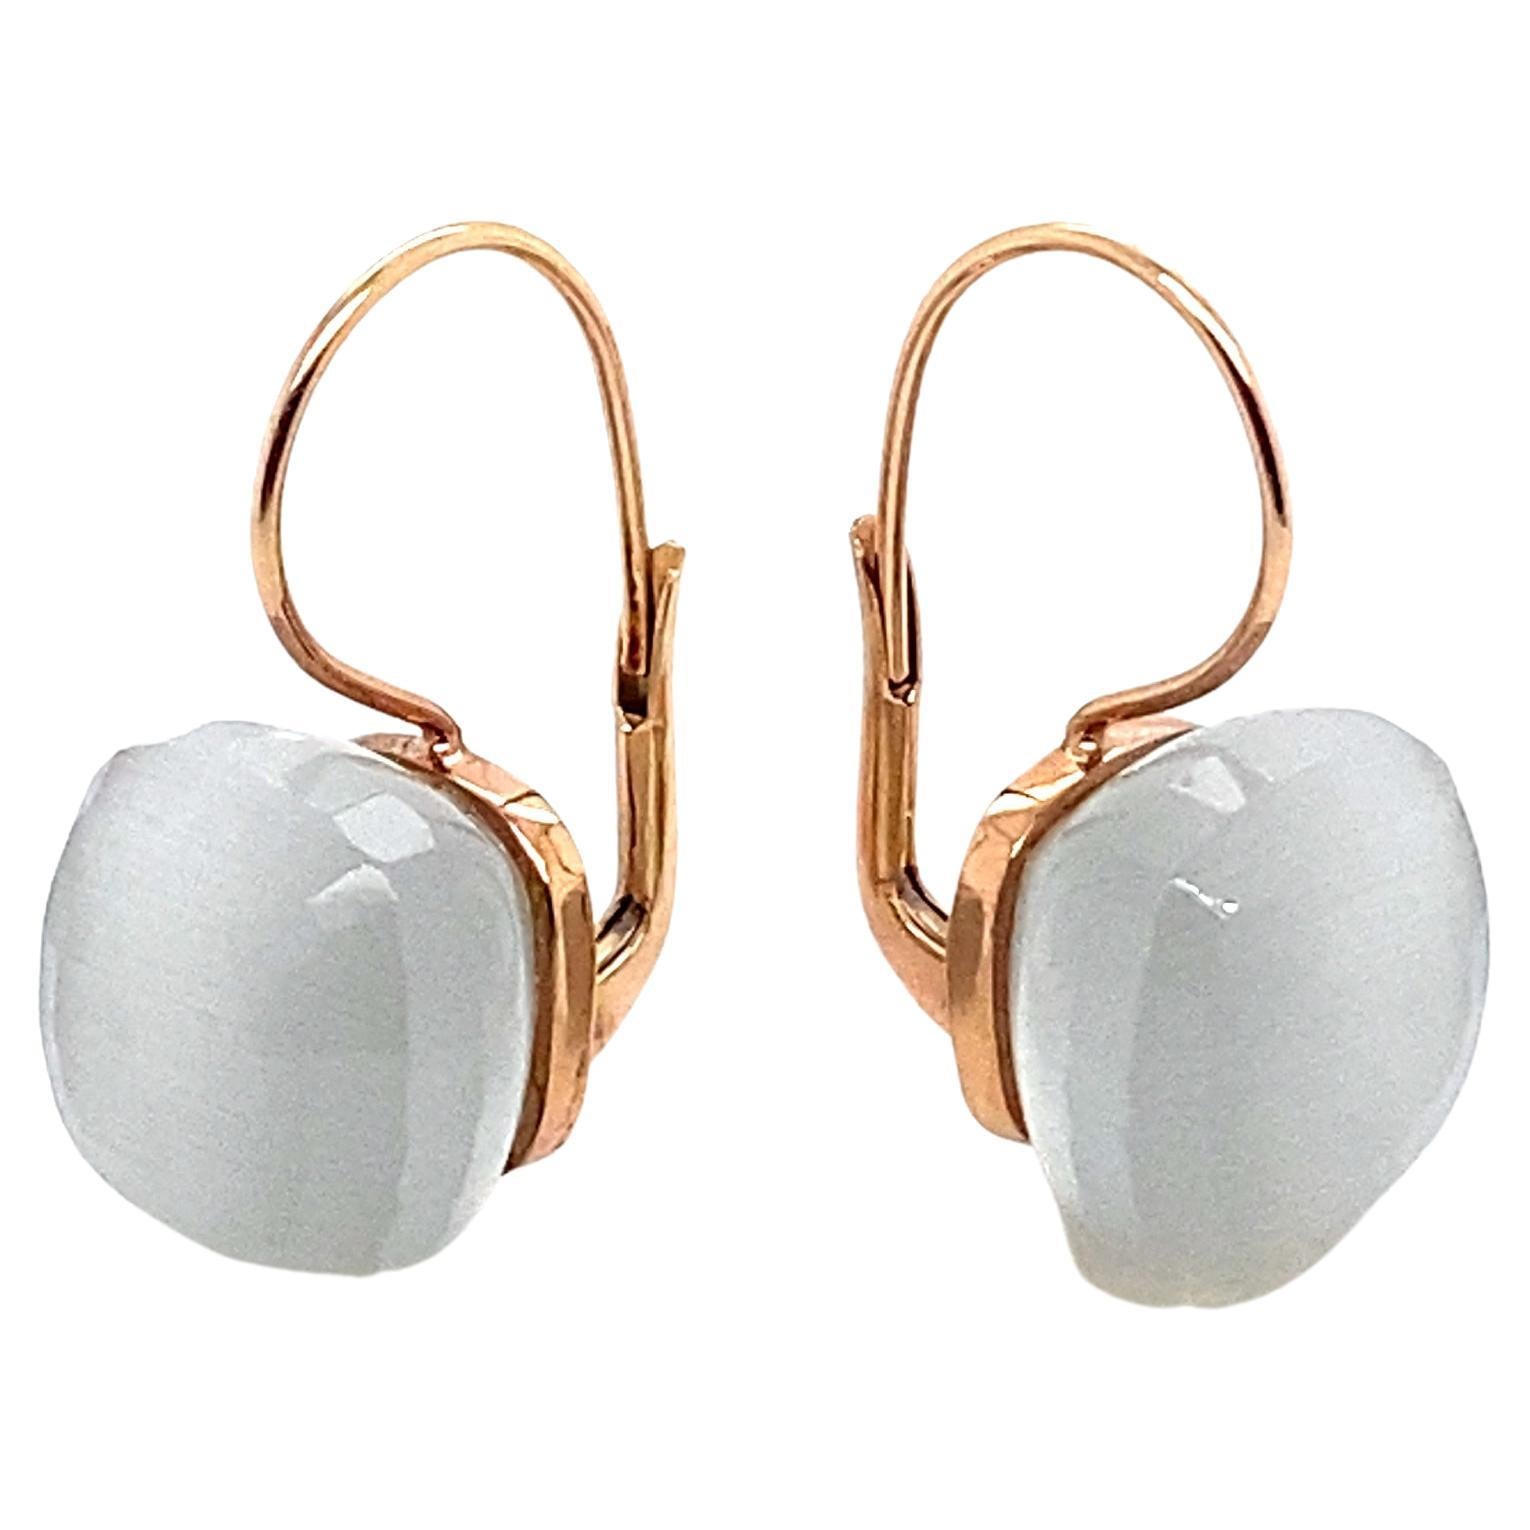 Model Lever-Back with a Grey Hydro Quartz Earrings Gold 18 Karat   For Sale 1